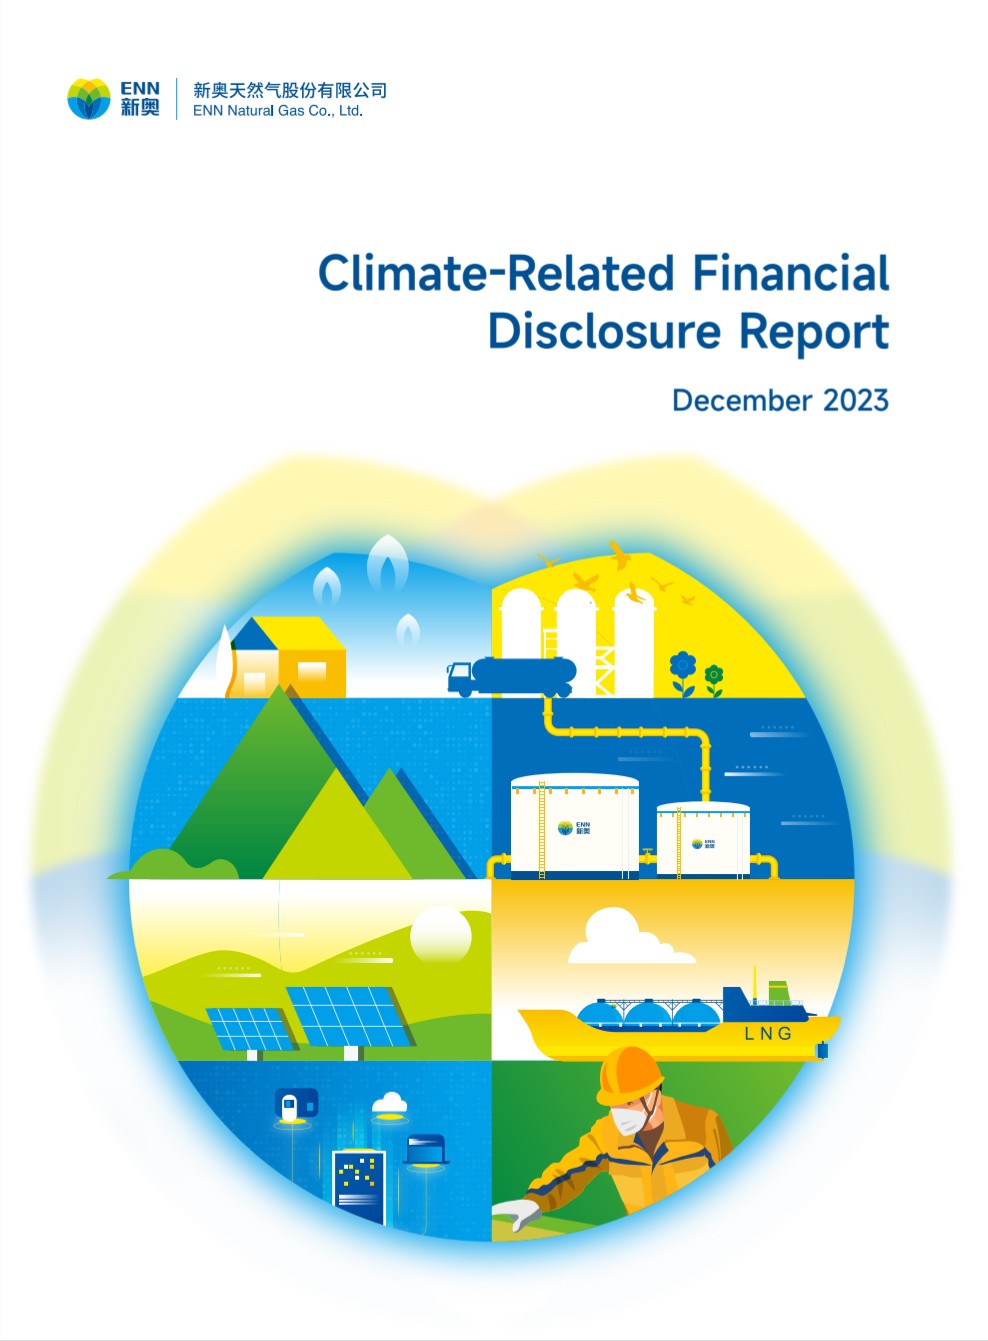 2023 Climate-Related Financial Disclosure Report